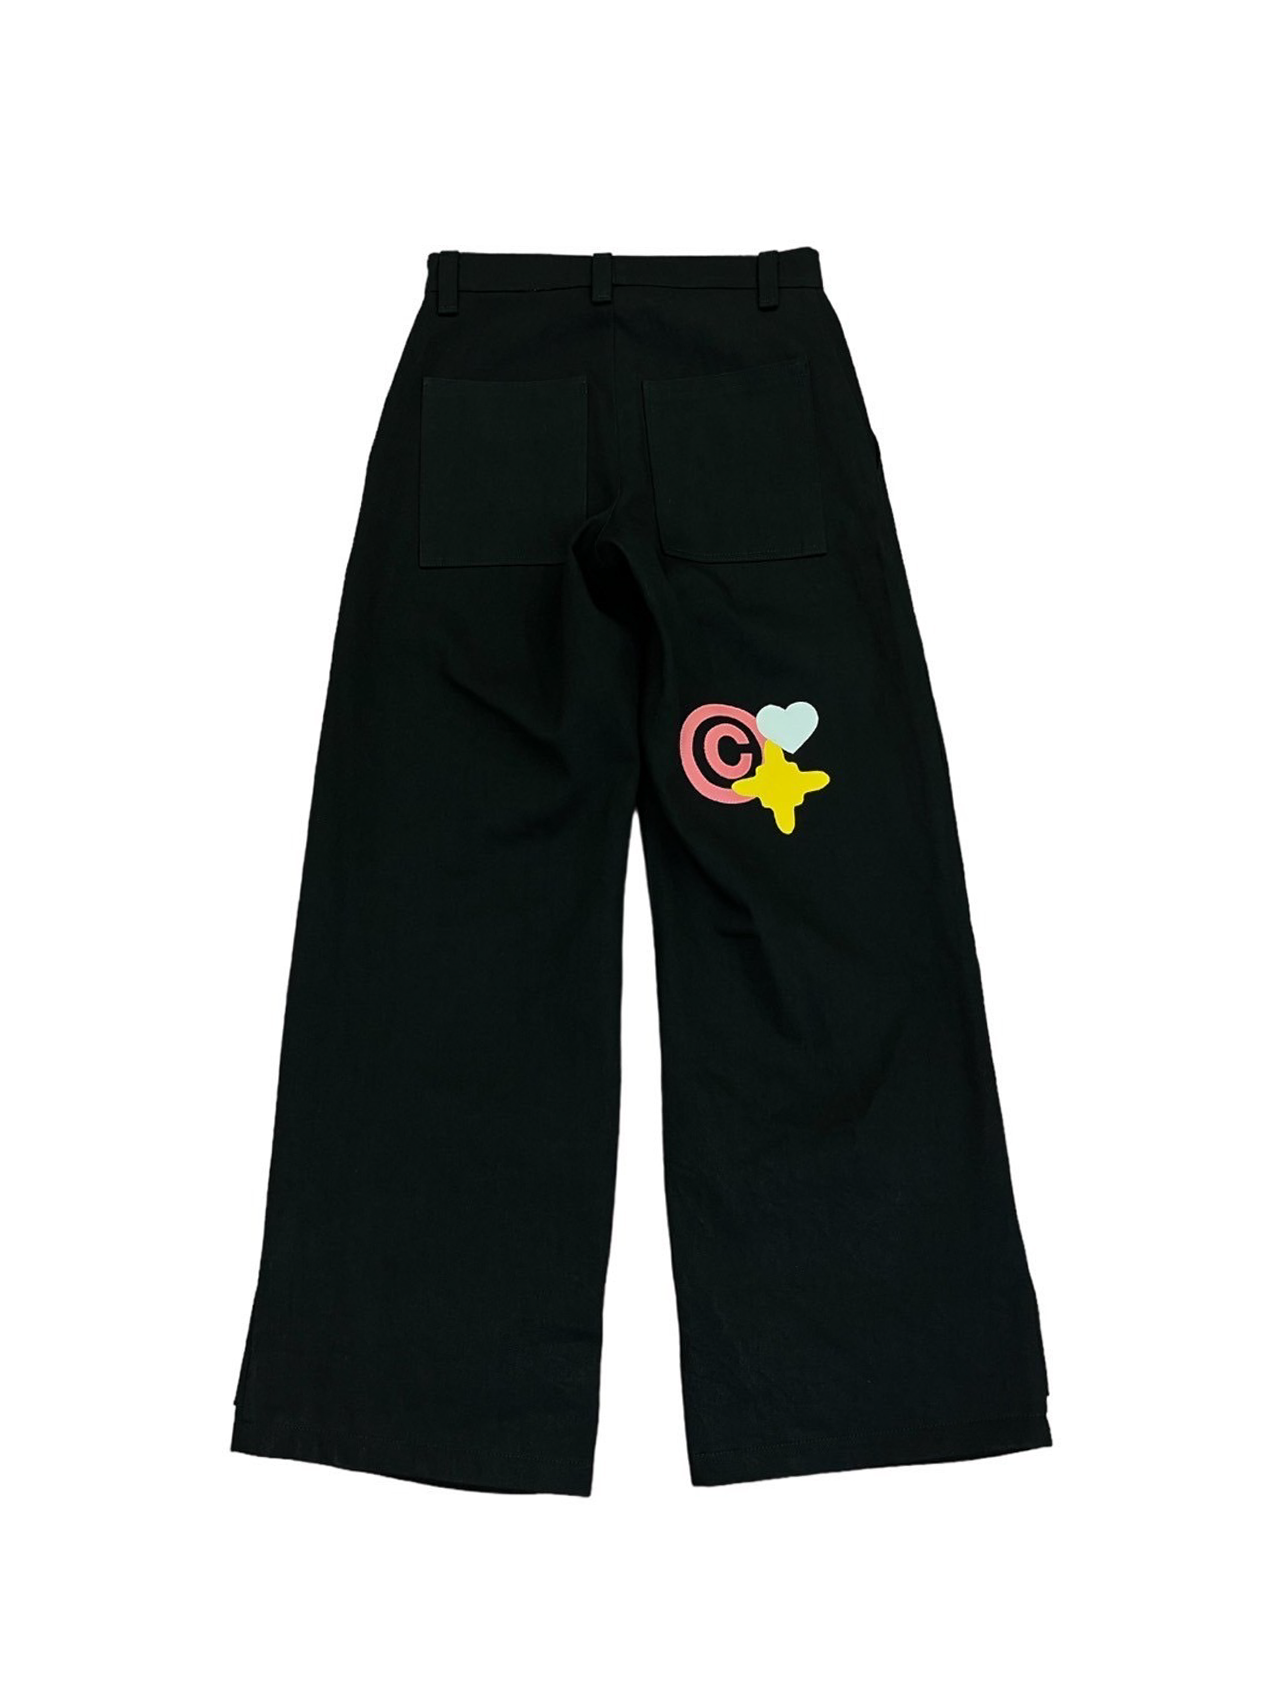 imma × CPD Patch Pants